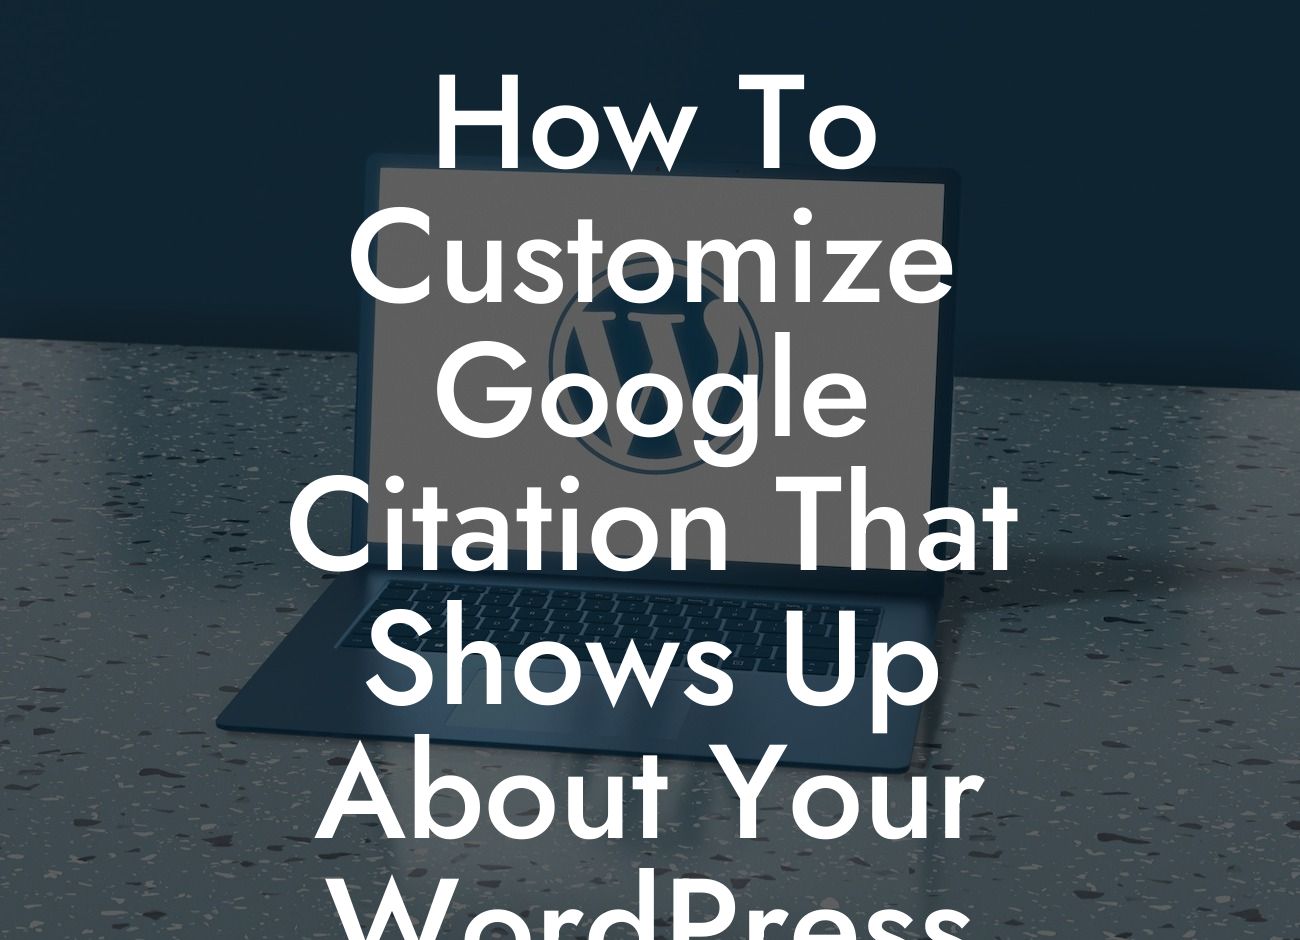 How To Customize Google Citation That Shows Up About Your WordPress Website